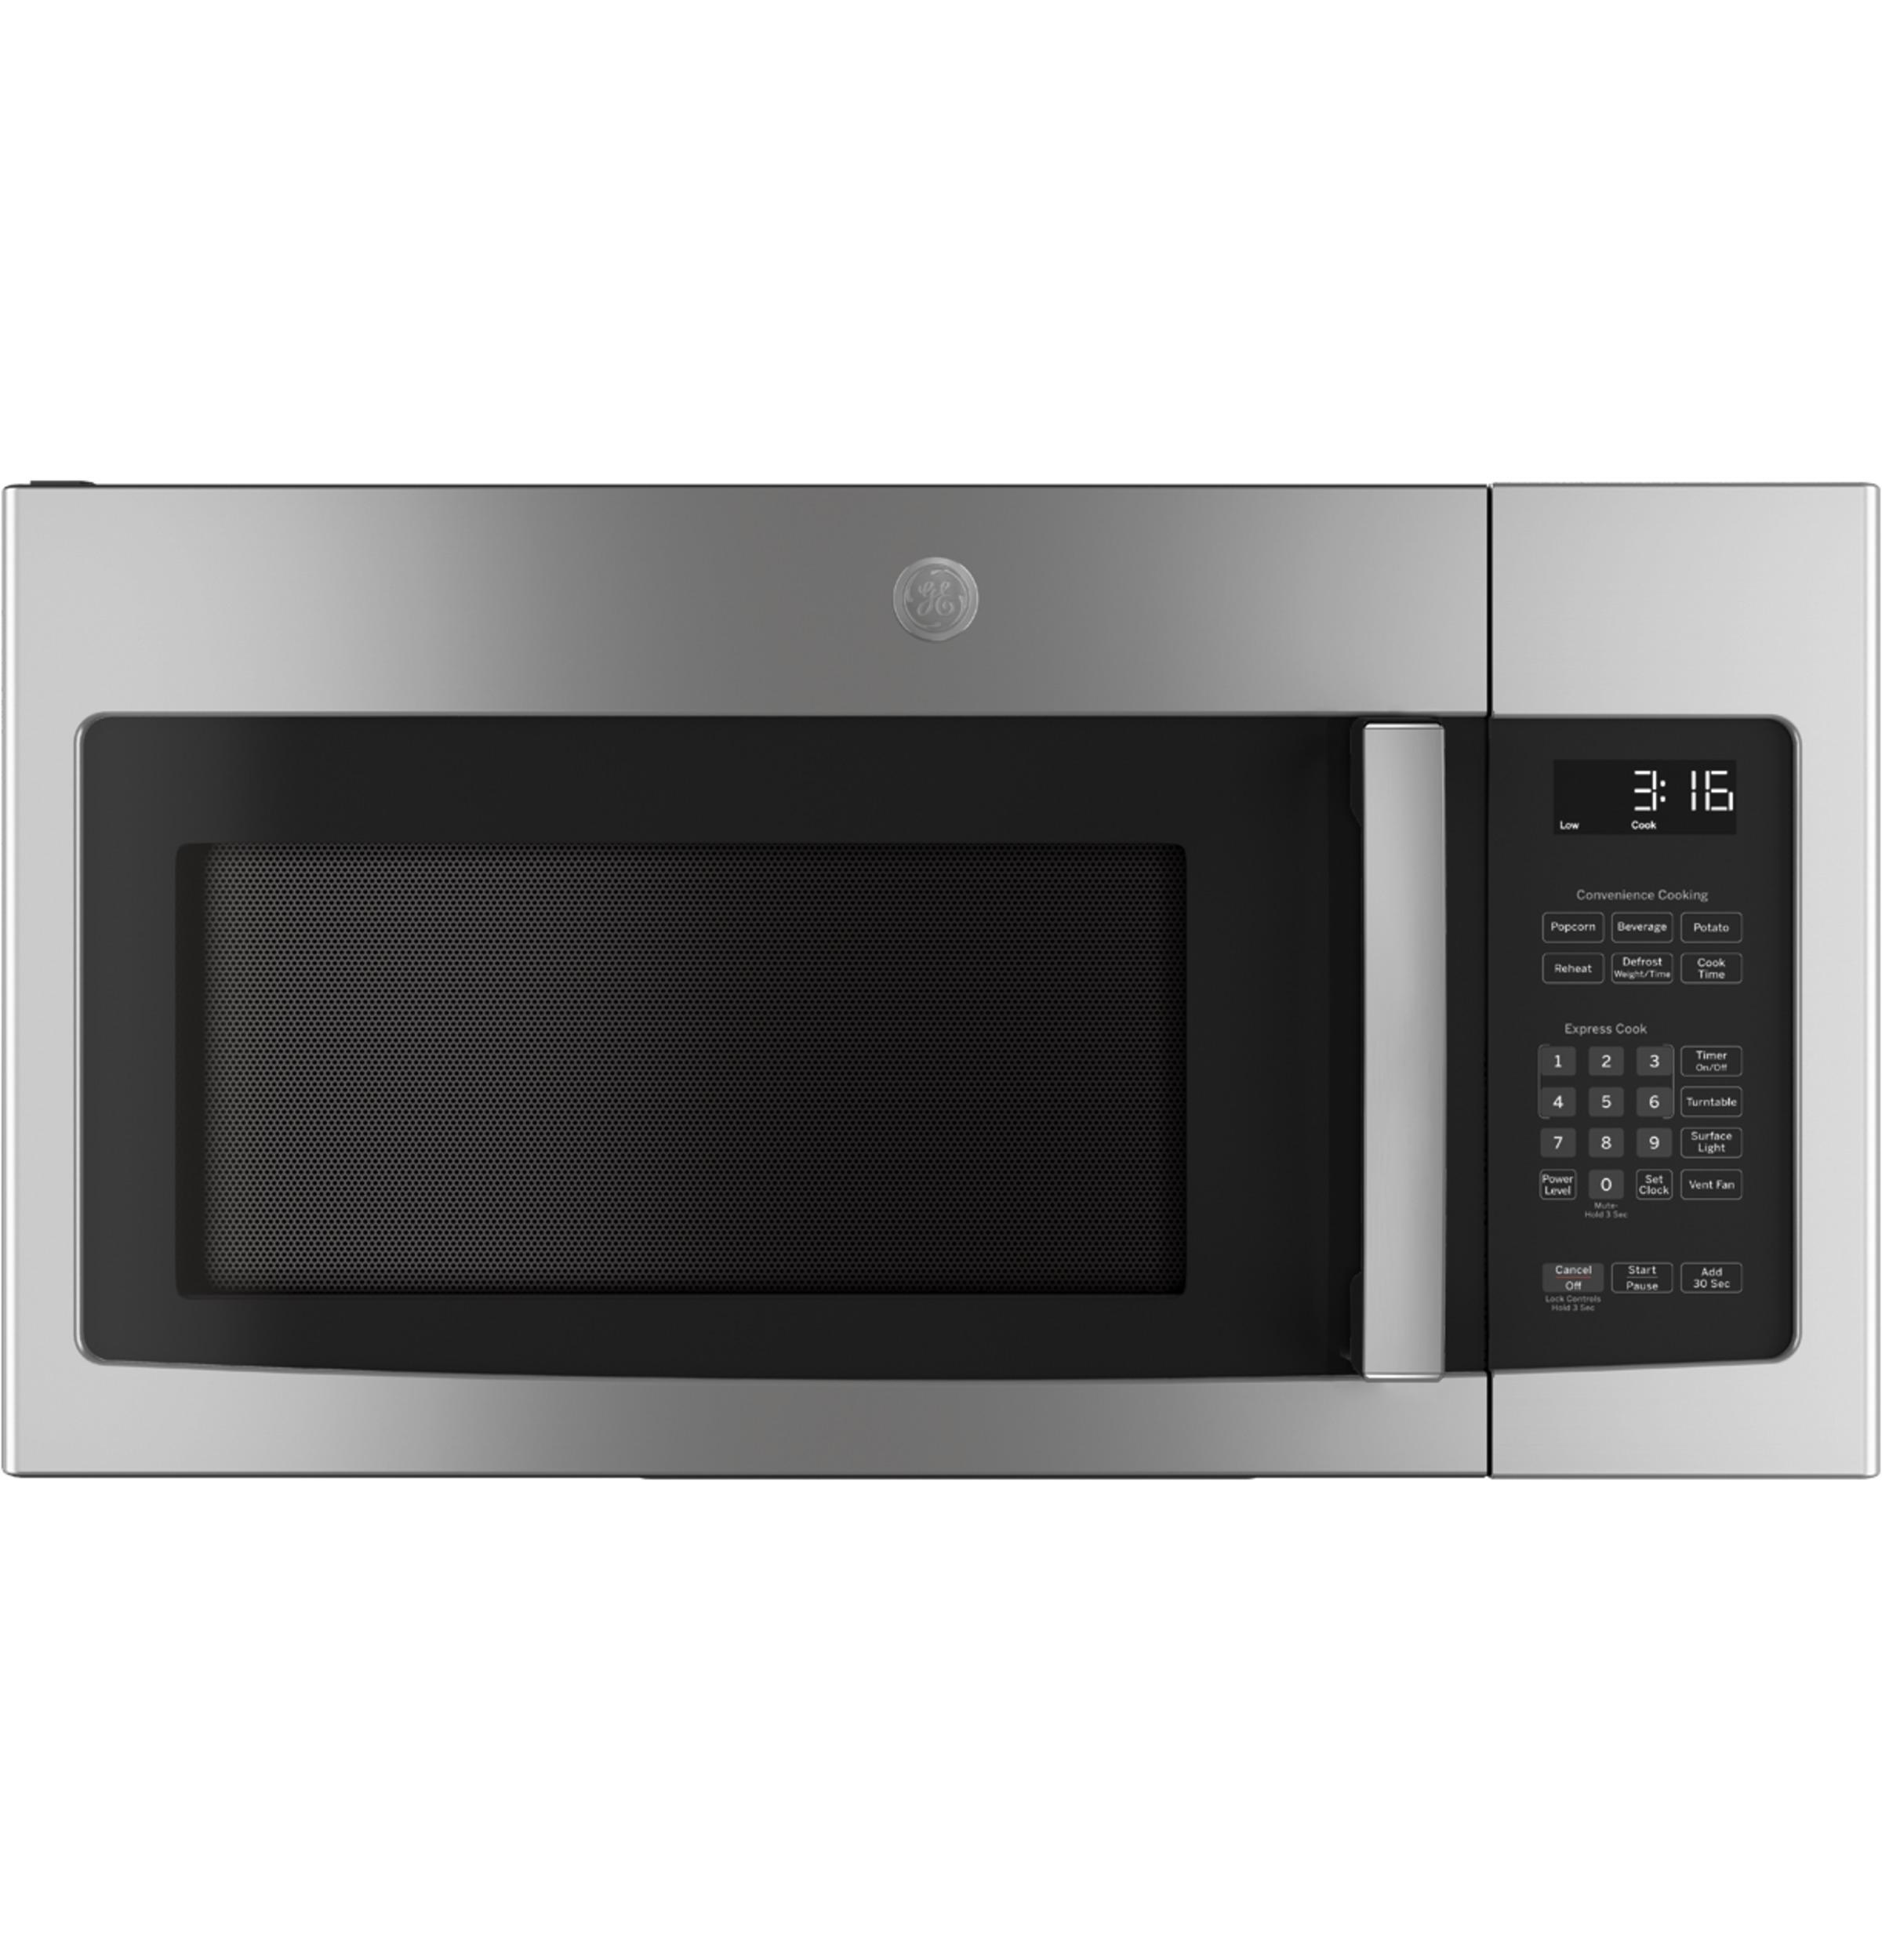 General Electric JVM3162RJSS 30 Inch Over the Range Microwave Oven